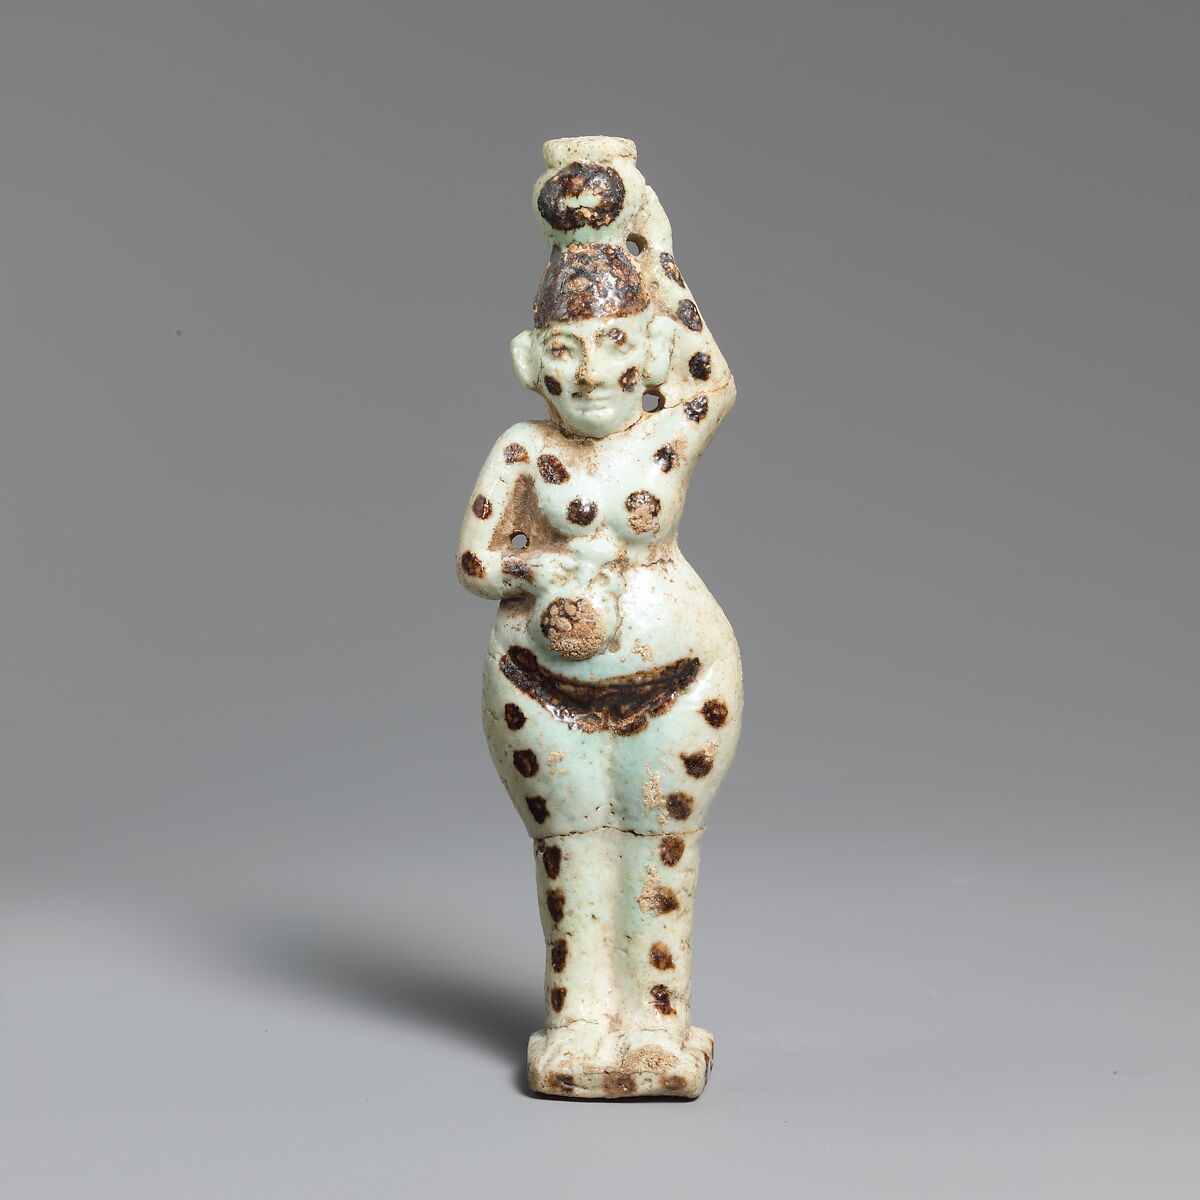 Faience statuette of a woman holding two vases, Faience, East Greek 